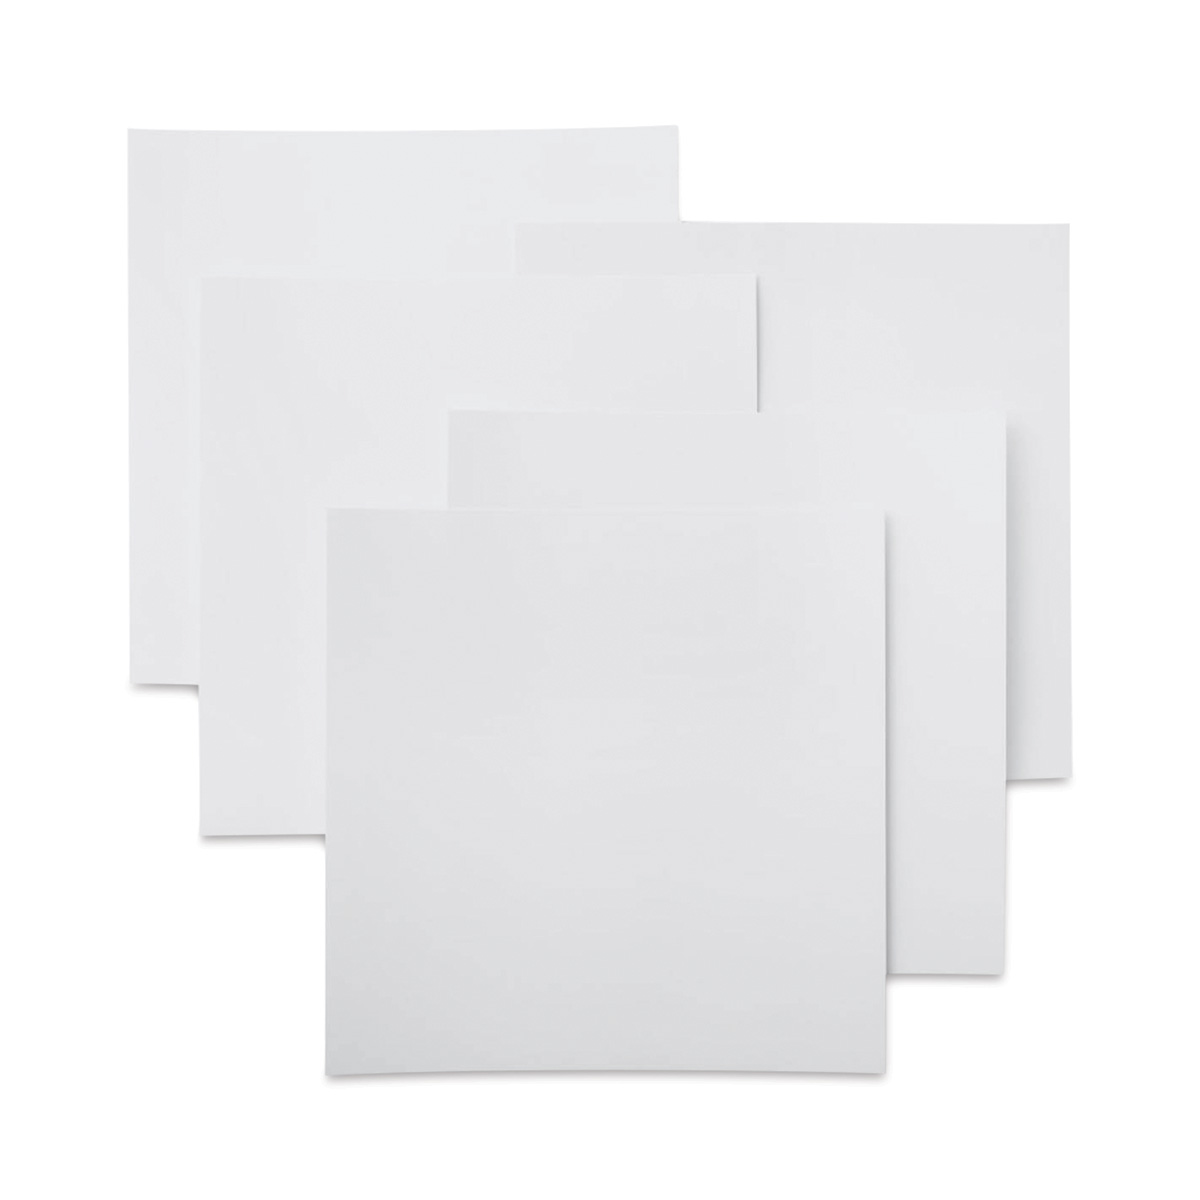 Cricut Smart Paper Sticker Cardstock - White, 13' x 13', Package of 10 Sheets